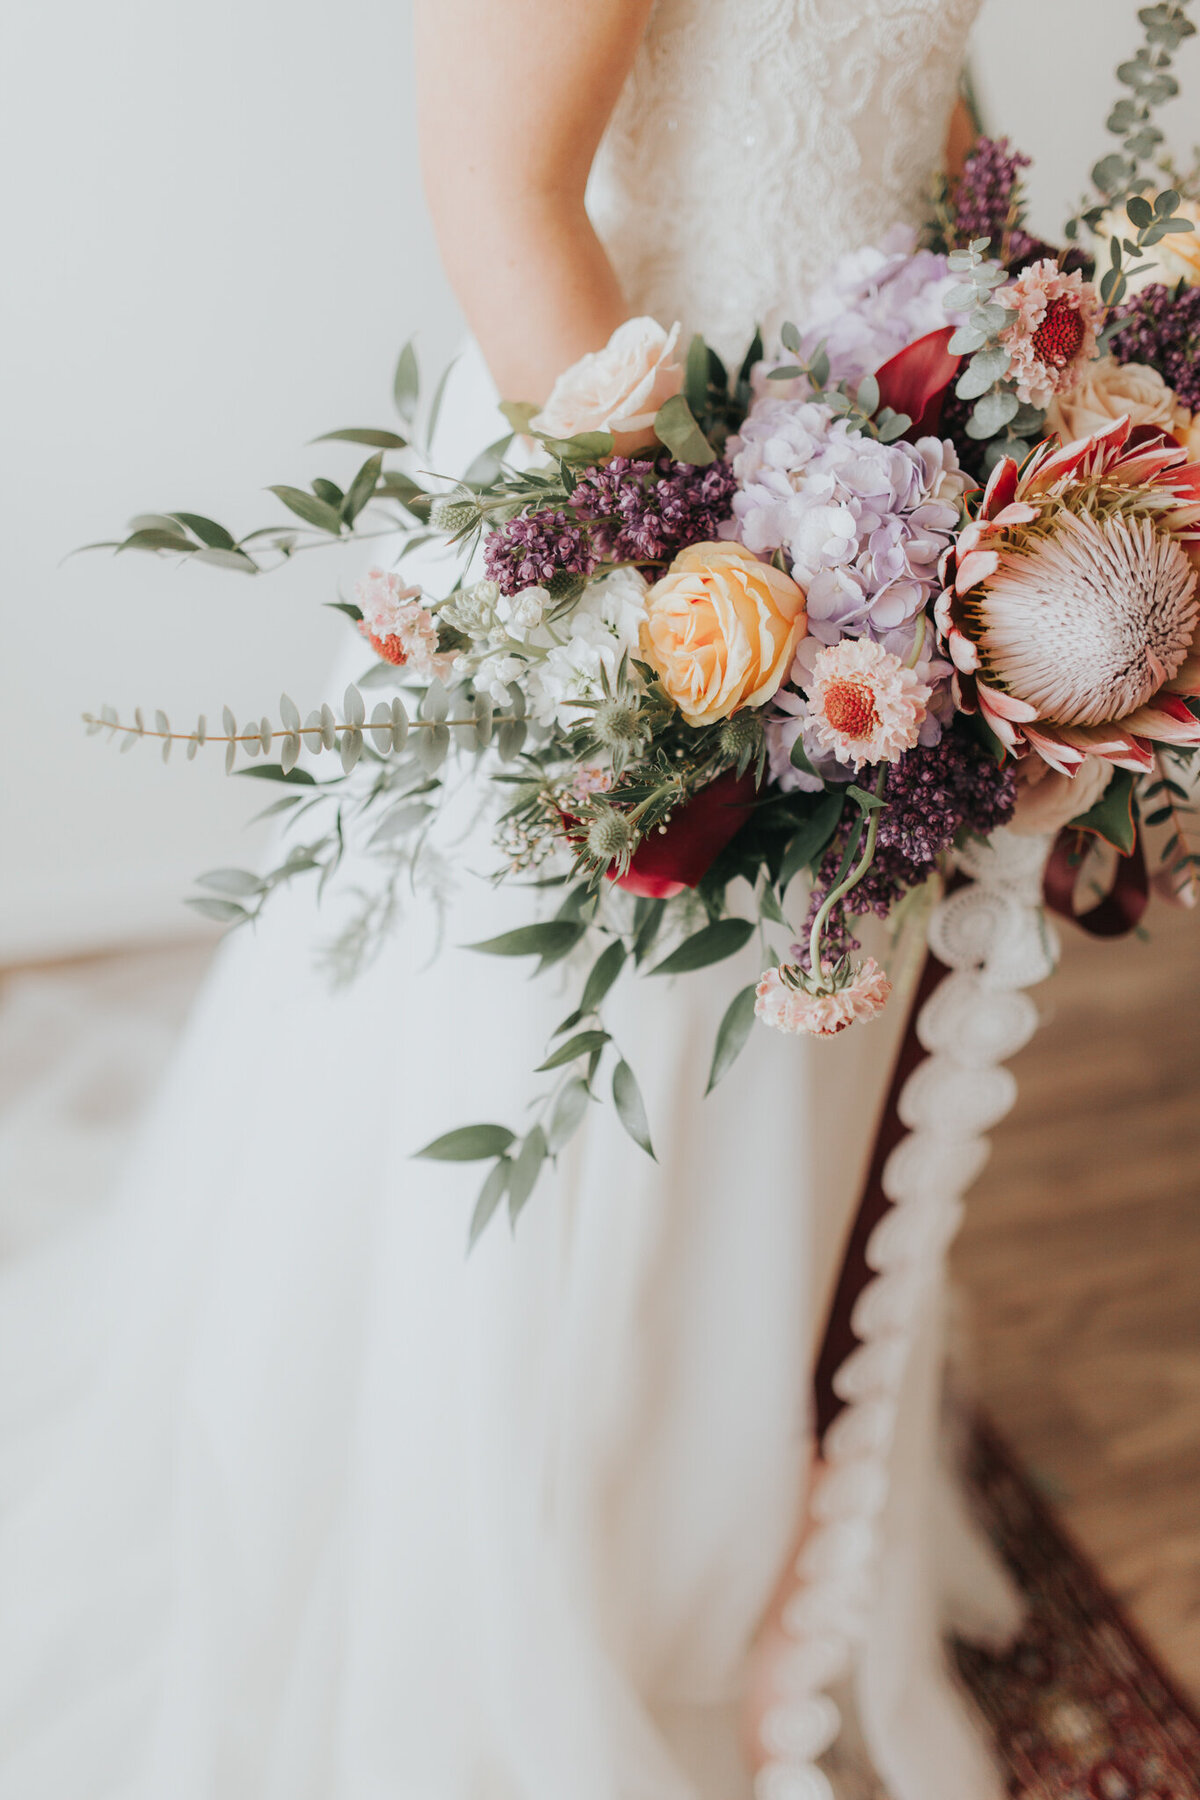 Colourful and romantic bouquet of purple and orange by The Romantiks, romantic wedding florals based in Calgary, AB & Cranbrook, BC. Featured on the Brontë Bride Vendor Guide.